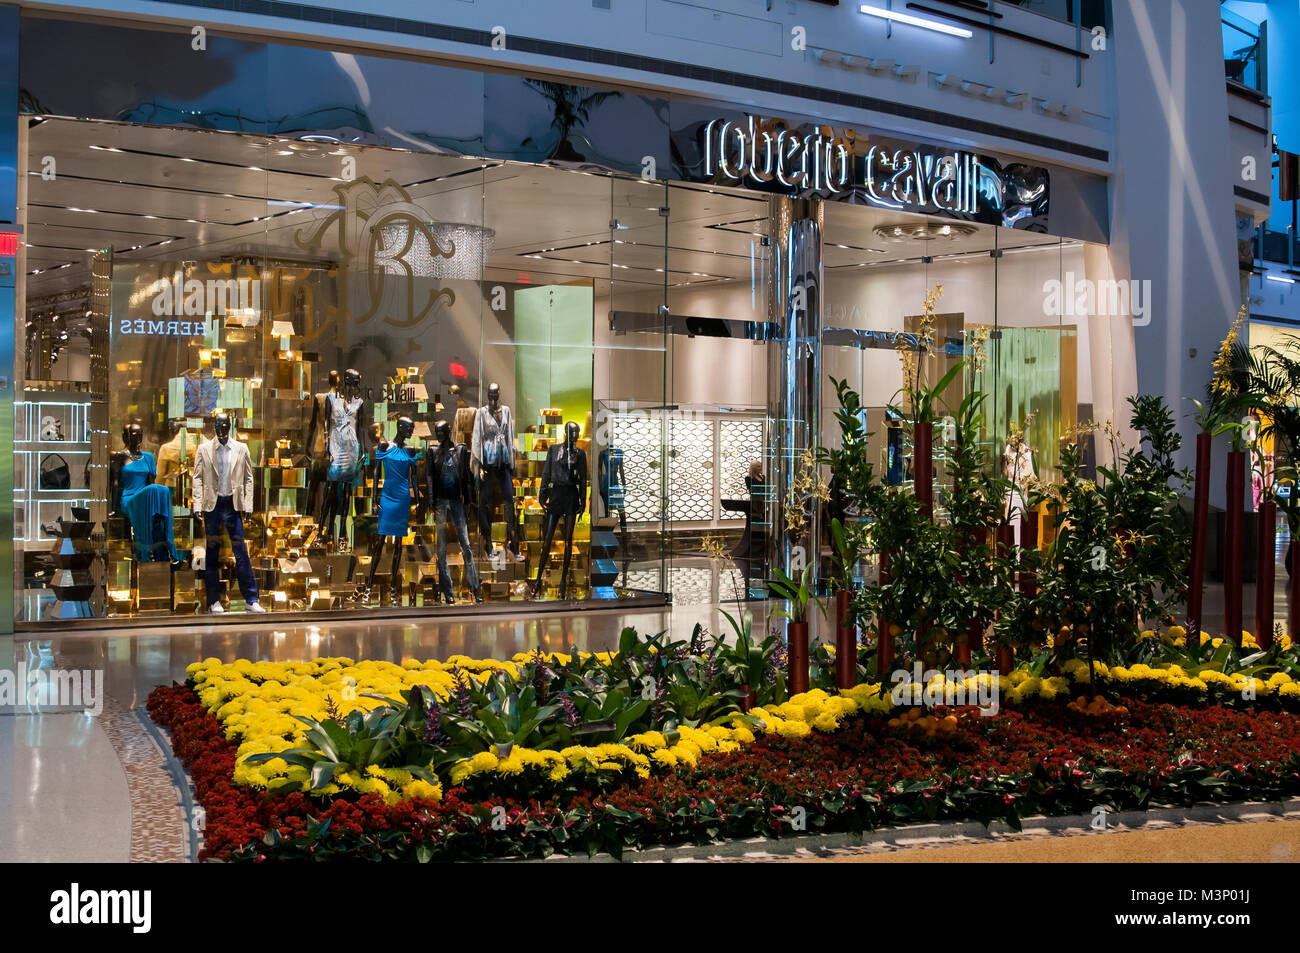 Las Vegas, Nevada. Crystals at City Center Shopping Mall.  Roberto Cavalli's boutique within The Shops at Crystals features women's and men's apparel. Stock Photo